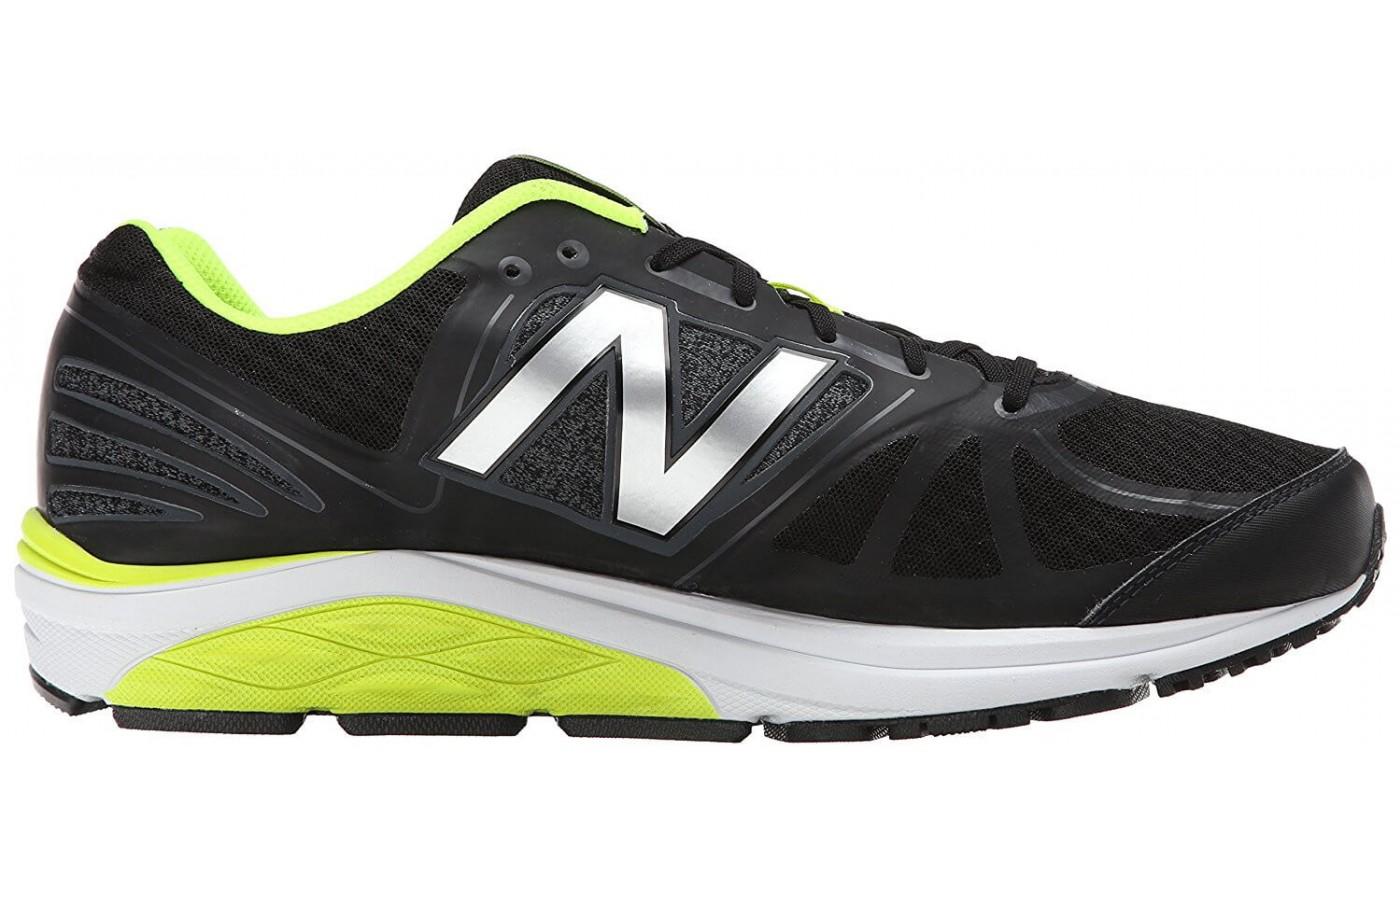 New Balance lowered the drop from 12 mm to 8 mm in the 5th version of the 770.